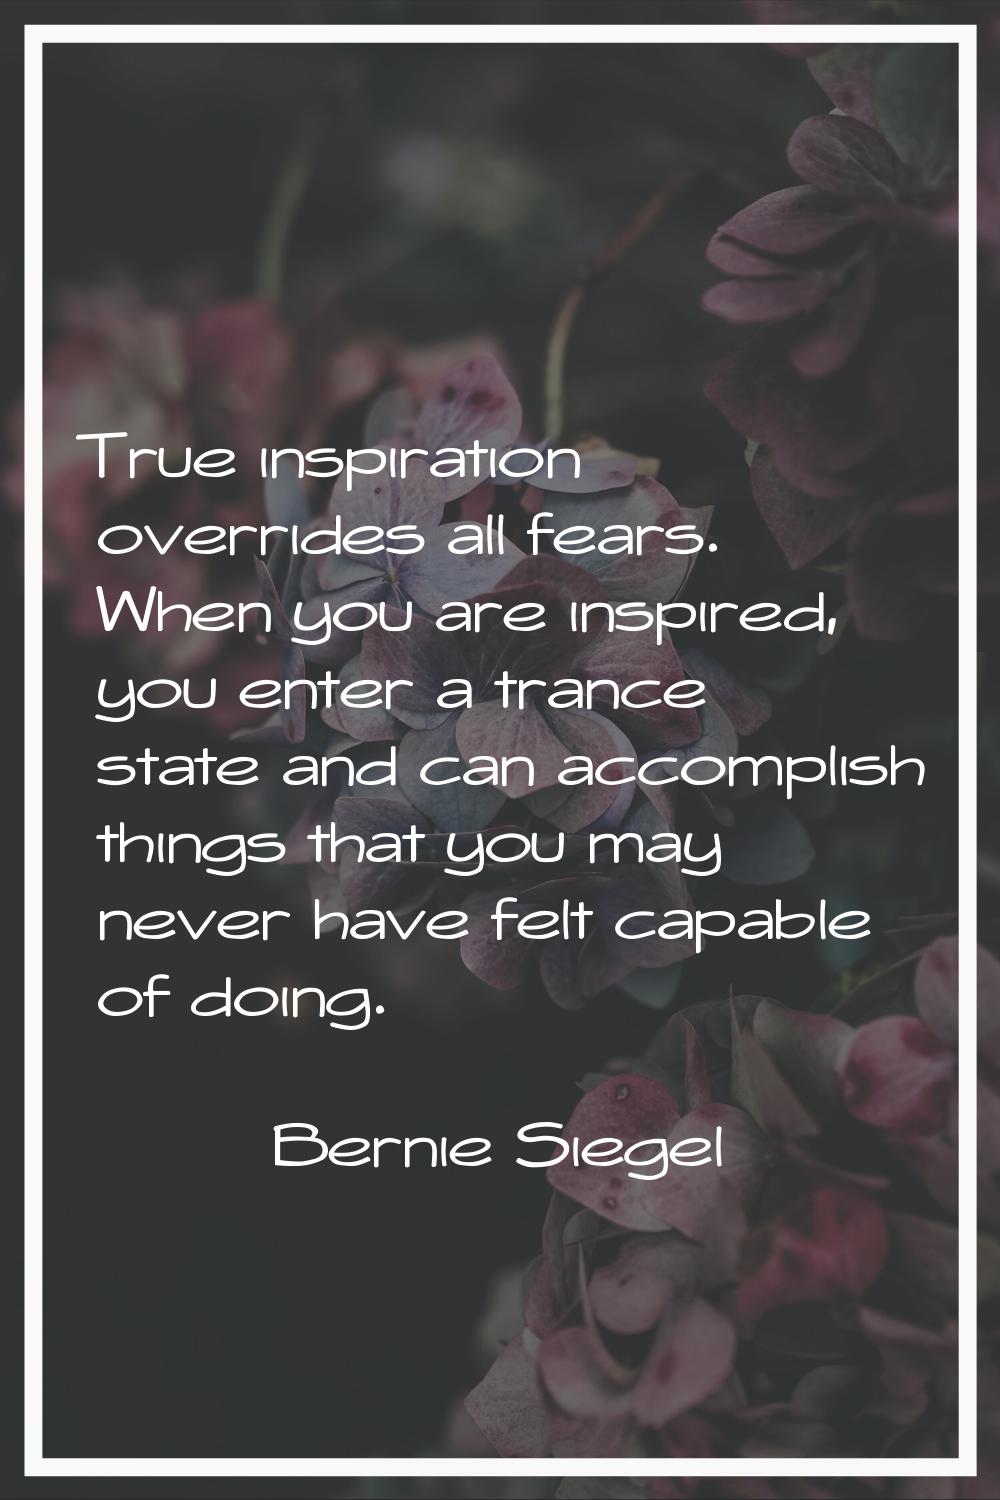 True inspiration overrides all fears. When you are inspired, you enter a trance state and can accom